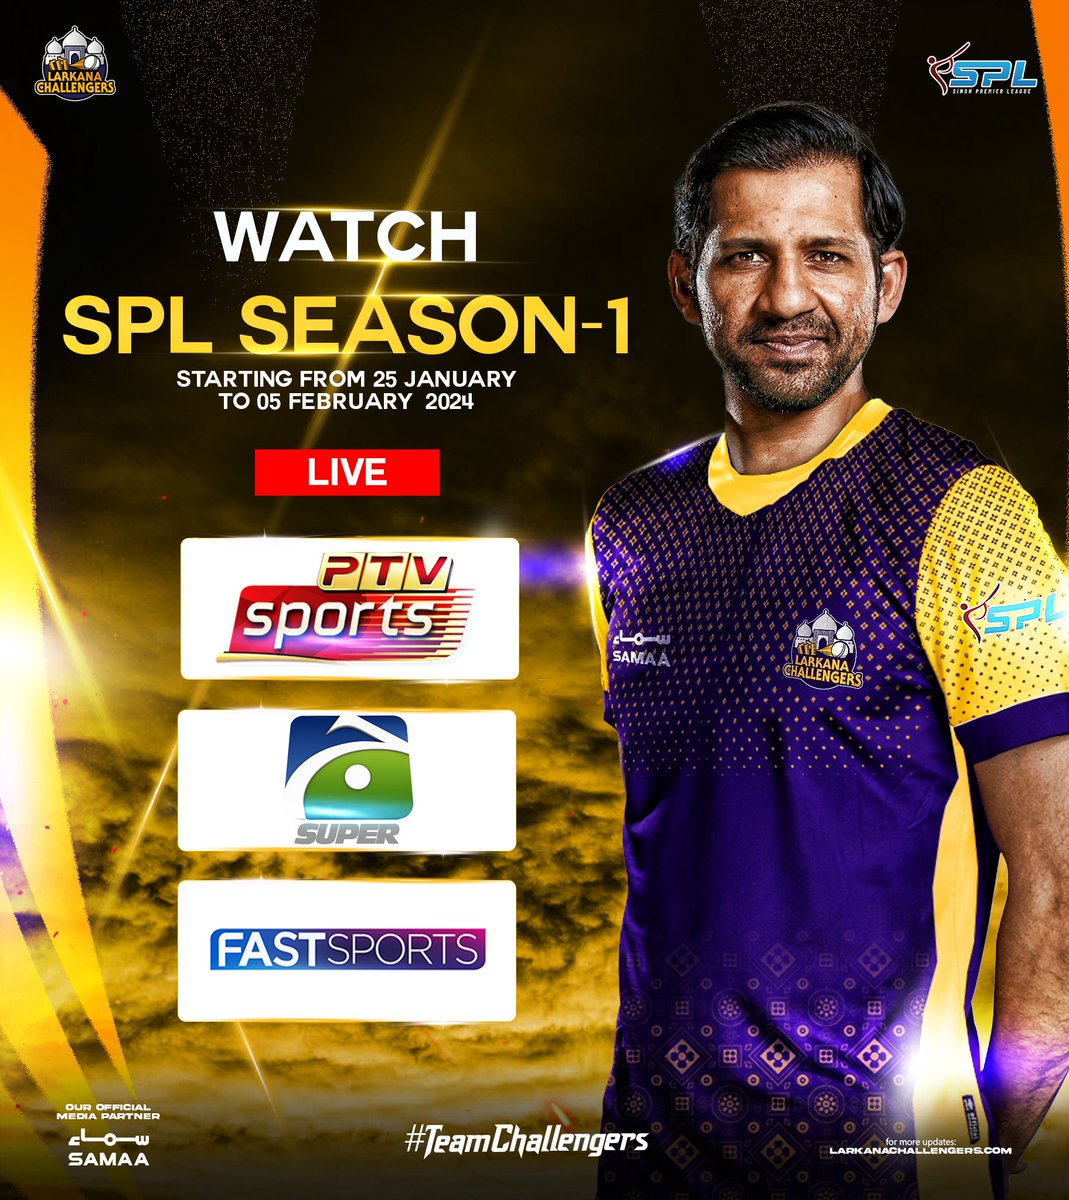 ✨WATCH #SPLSeason1 🔴 LIVE on 𝗣𝗧𝗩 𝗦𝗣𝗢𝗥𝗧𝗦, 𝗙𝗔𝗦𝗧 𝗦𝗣𝗢𝗥𝗧𝗦 & 𝗚𝗘𝗢 𝗦𝗨𝗣𝗘𝗥.
The most anticipated and ⚡electrifying cricket🏏 to start from 25th January to 5th February 2024.

 #SPL #TeamChallengers #LarkanaChallengers💜💜 #LarkanaChallengers